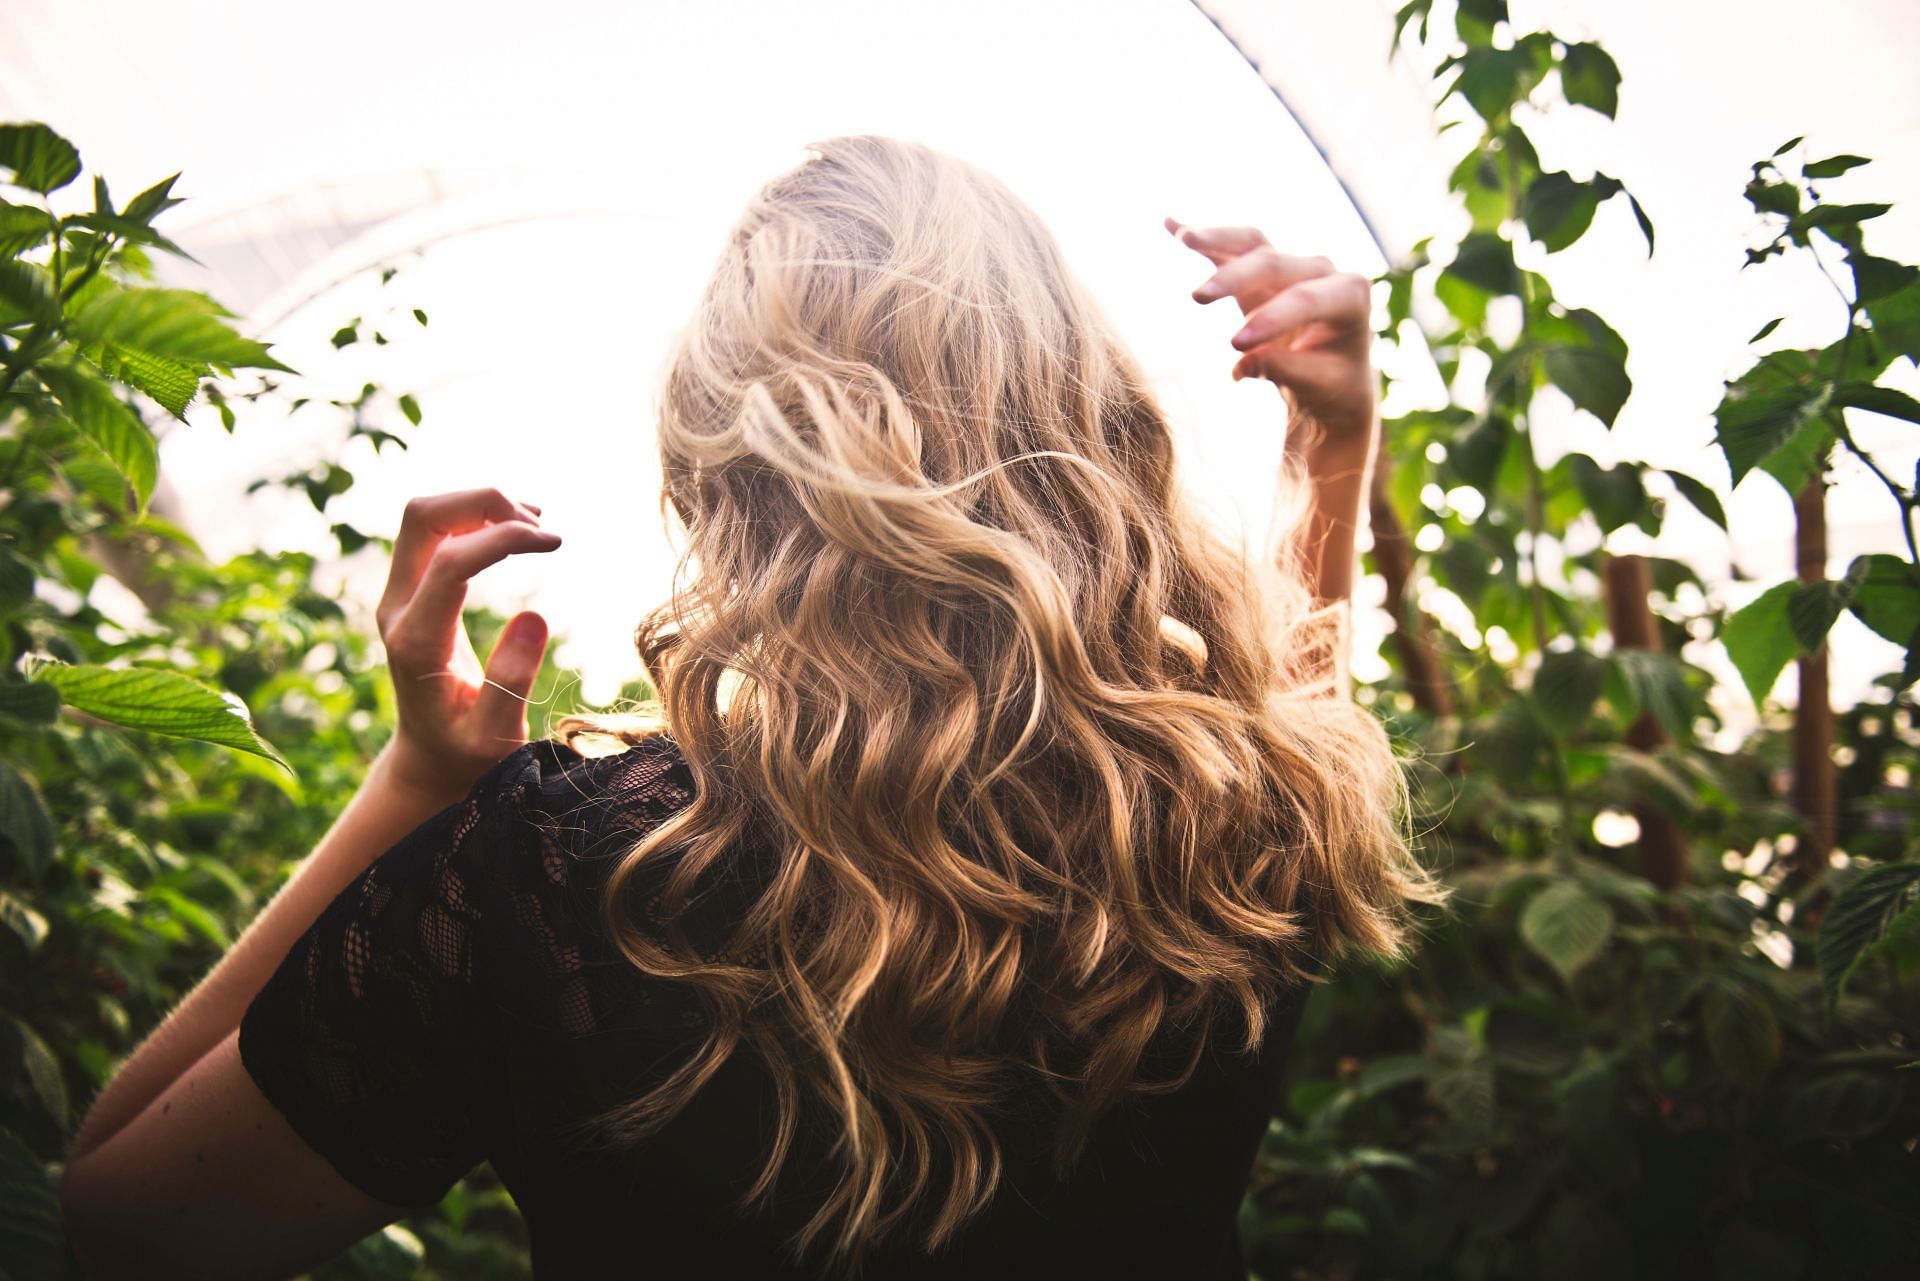 Following a proper hair care routine is essential forwell nourished hair. (Image via Pexels/Tim Mossholder)